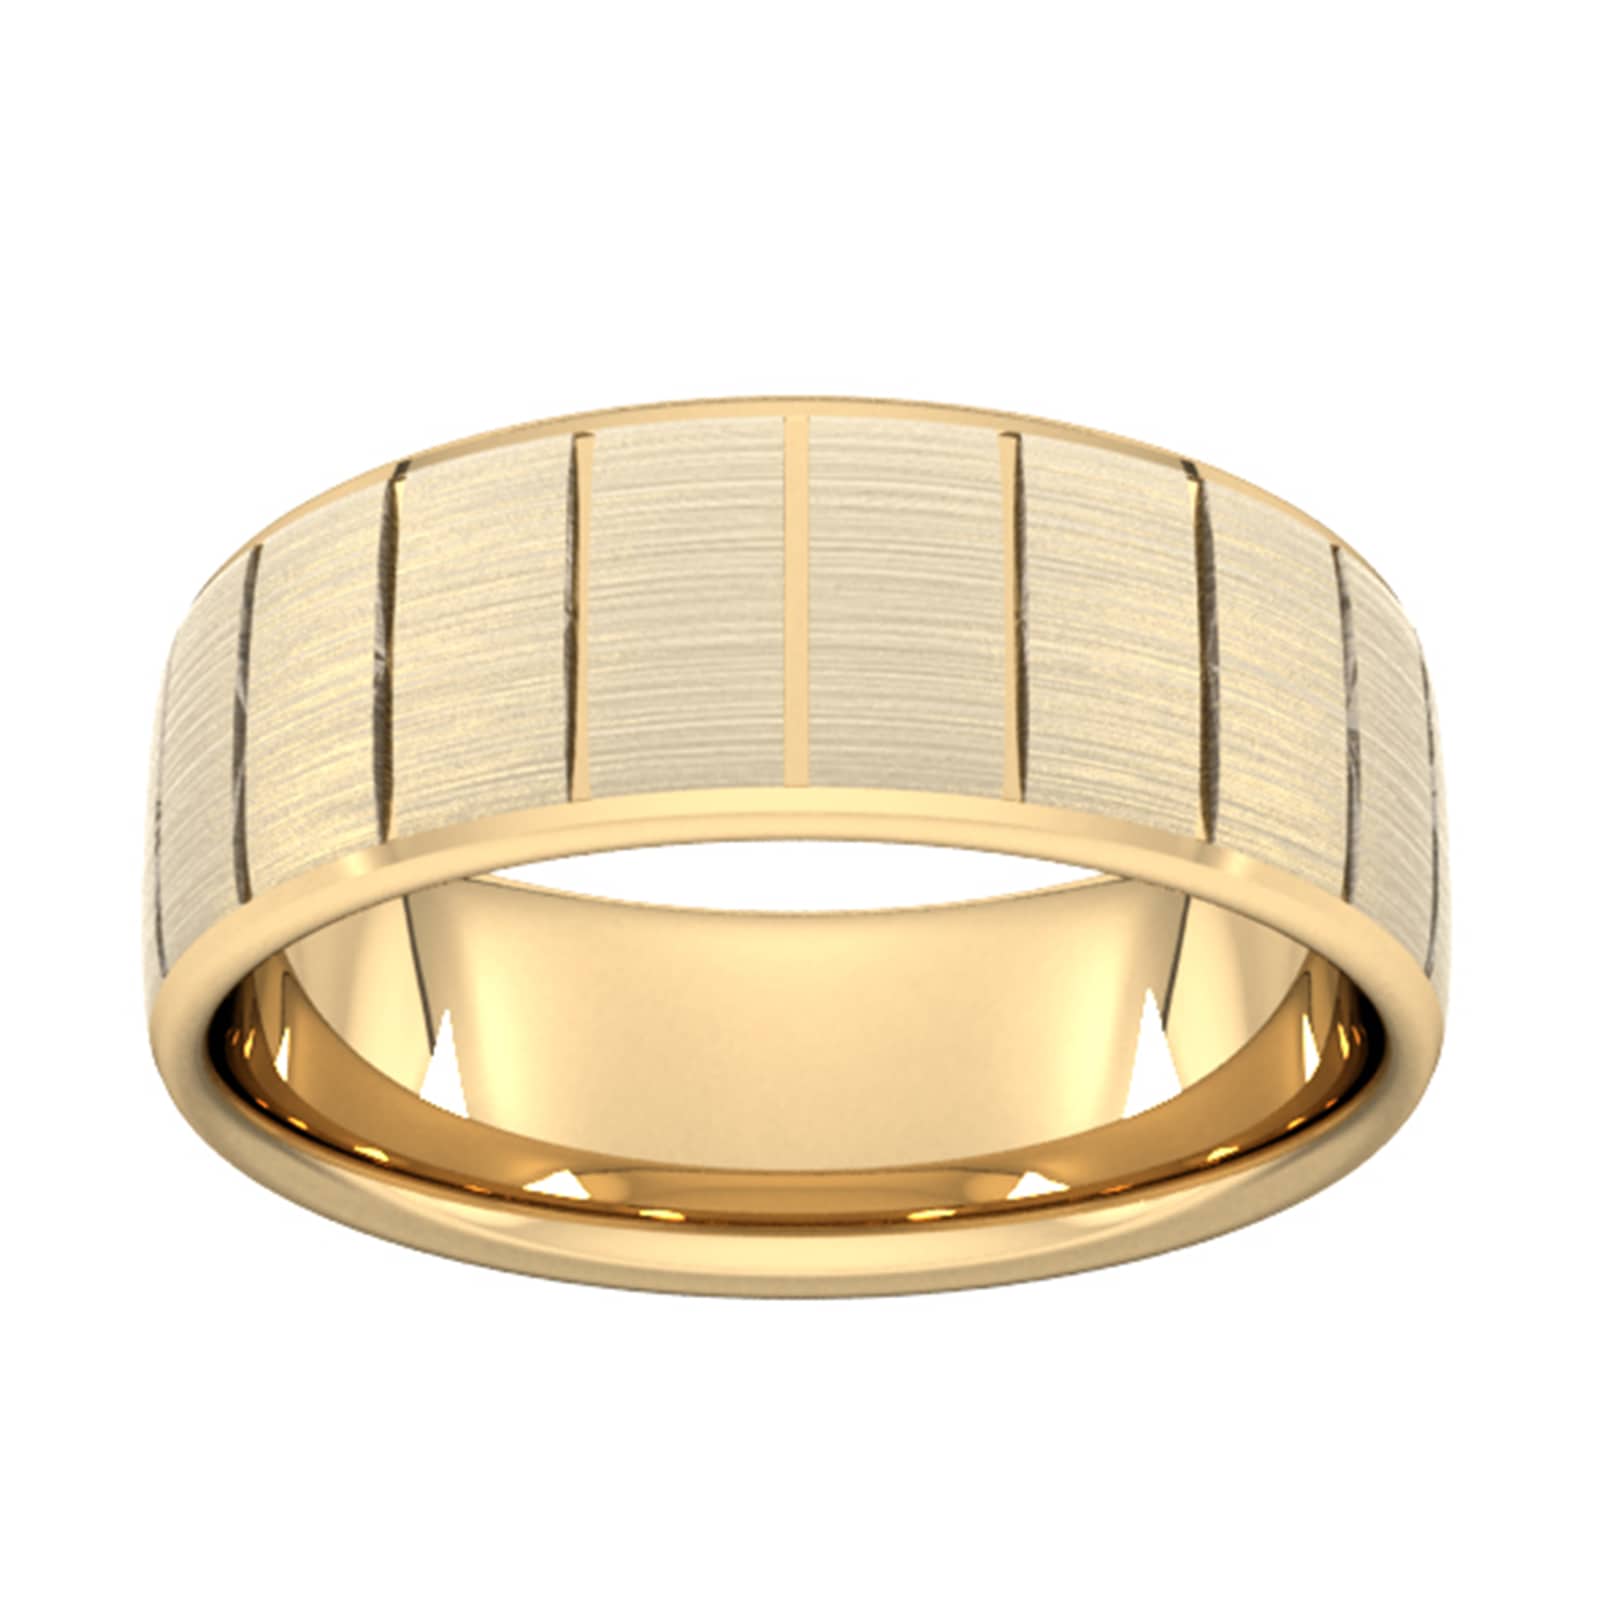 8mm Traditional Court Heavy Vertical Lines Wedding Ring In 9 Carat Yellow Gold - Ring Size W